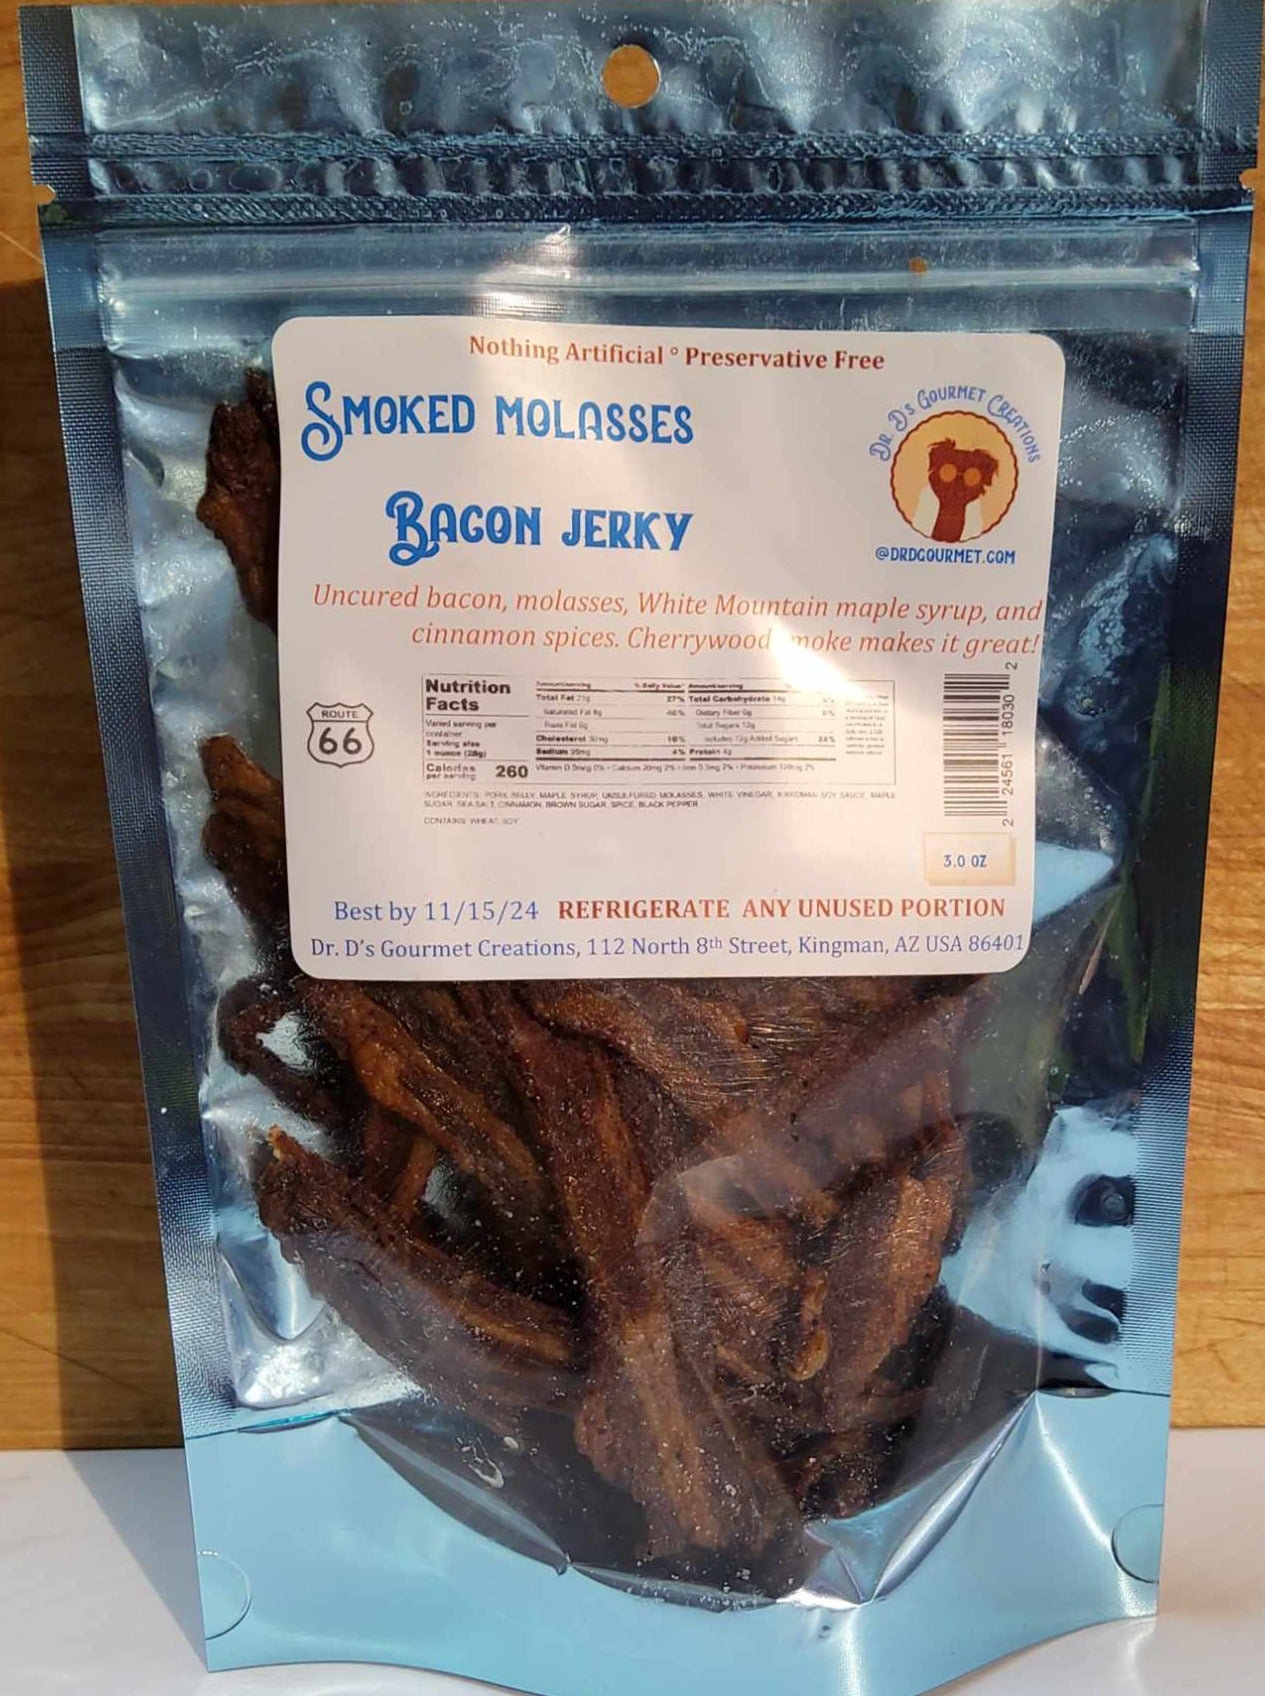 A package of our Smoked Molasses Bacon Jerky